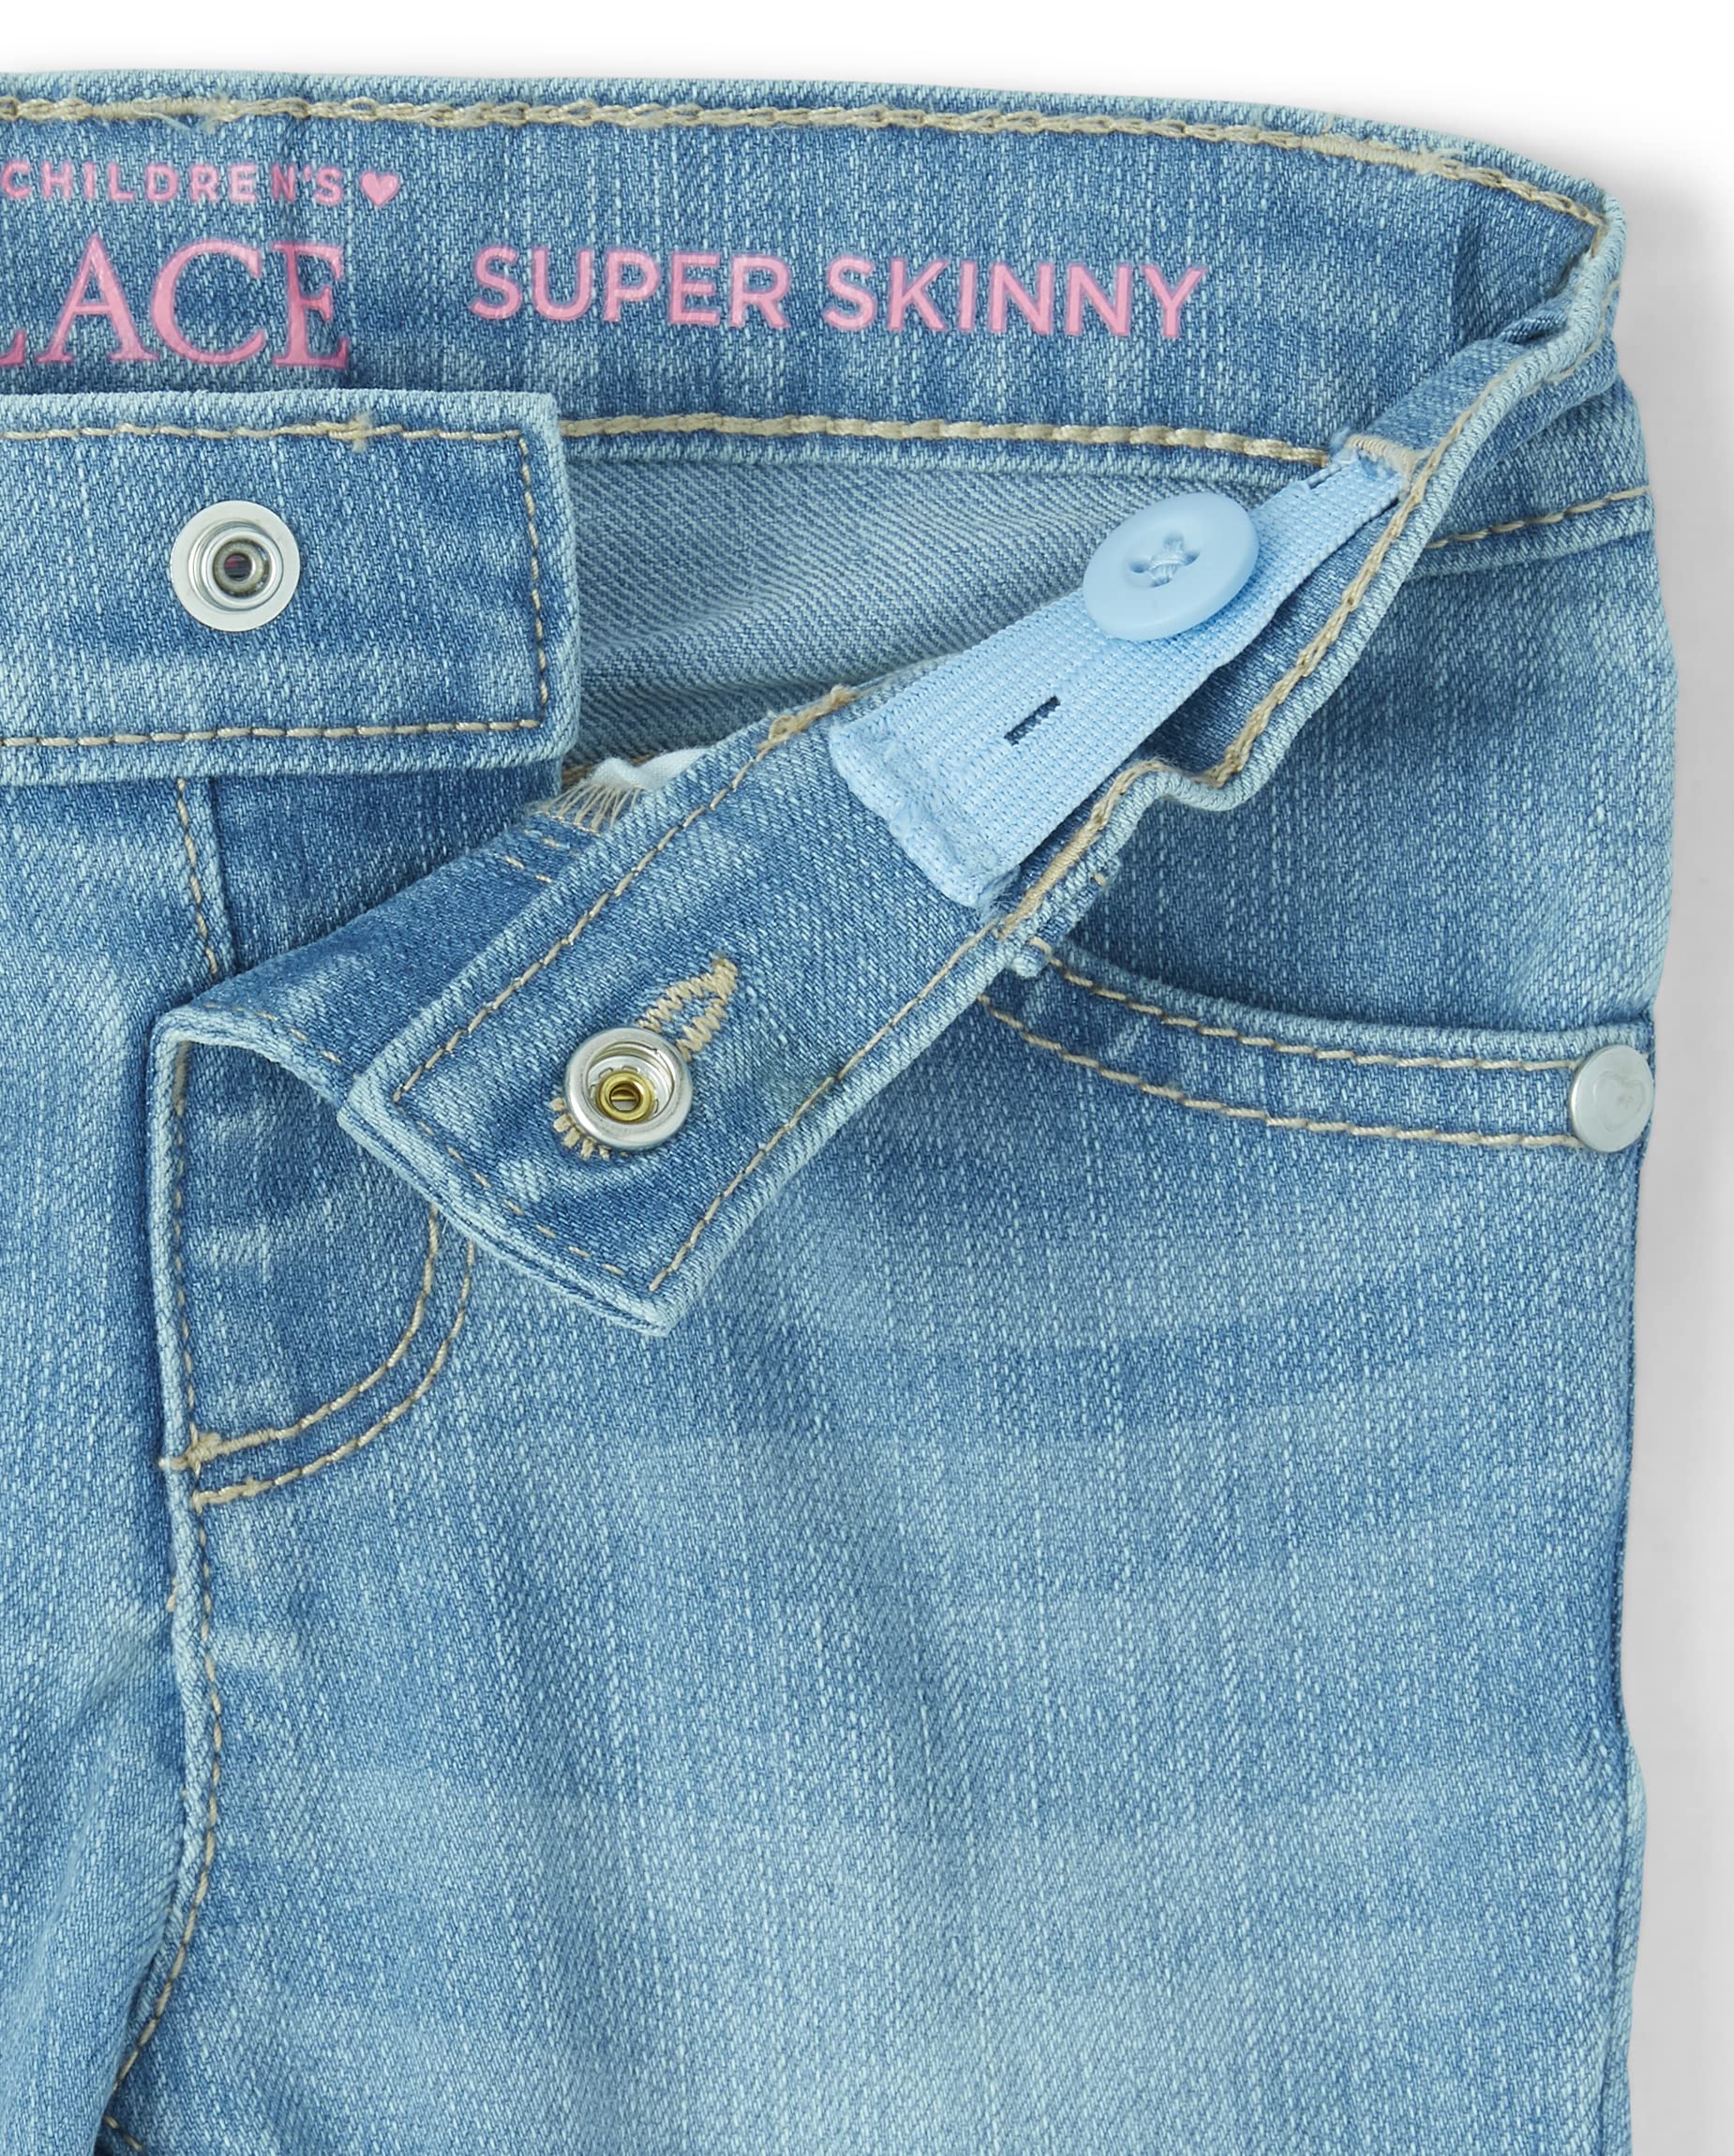 The Children's Place Baby Girls' and Toddler Multipack Basic Super Skinny Jeans